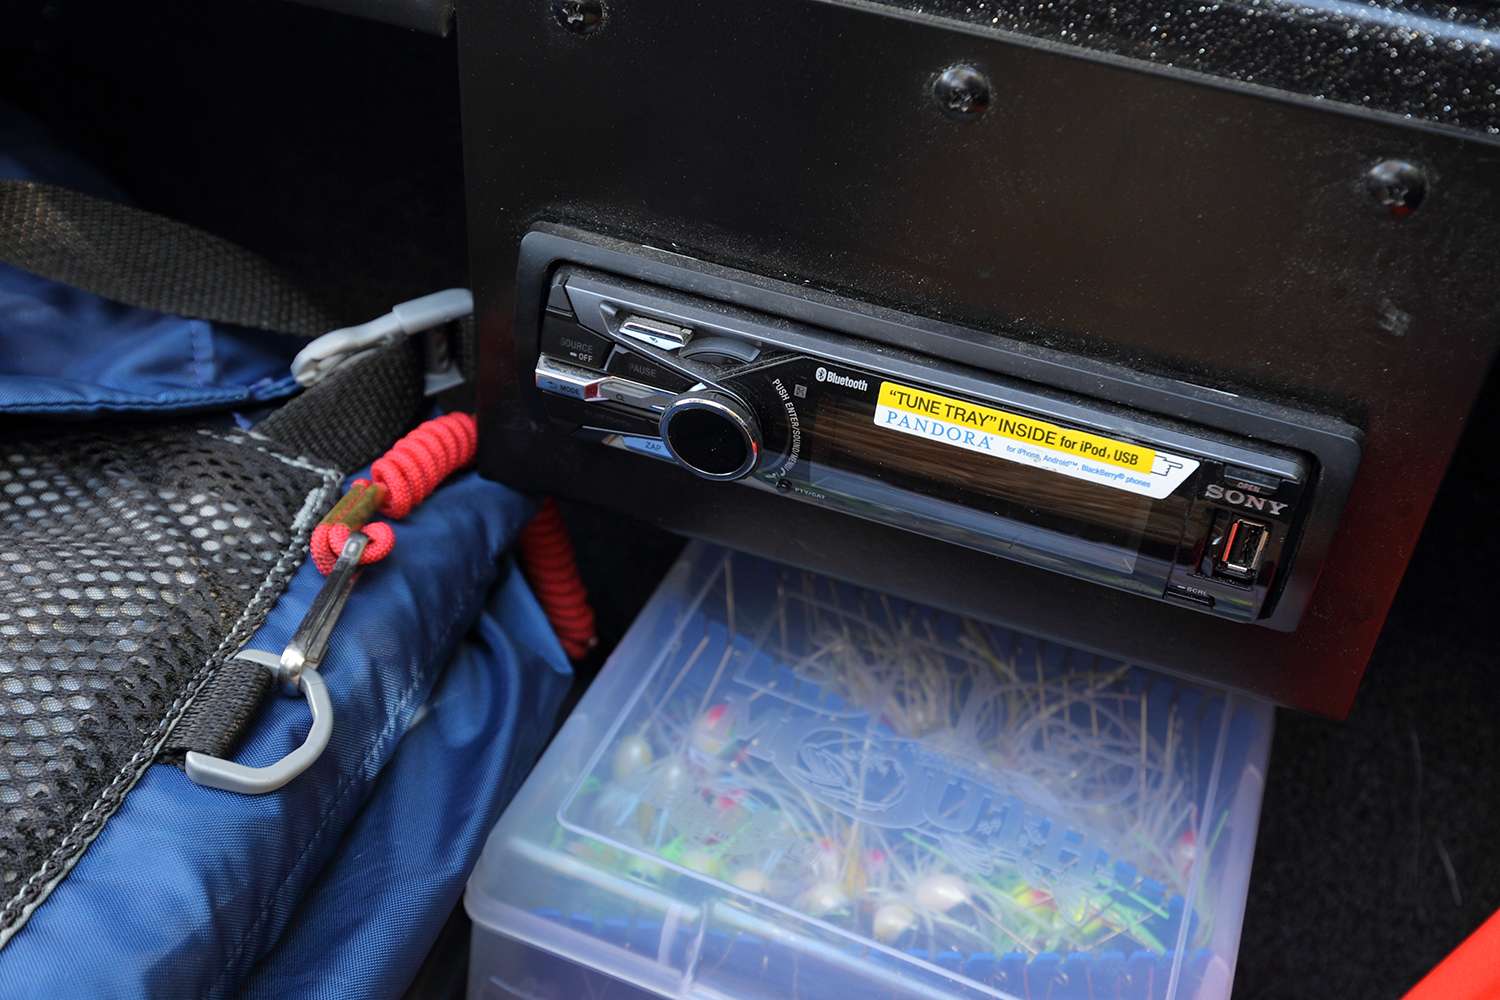 A Tune Tray inside the right rod locker allows VanDam to listen to his iPod when he's on the lake.